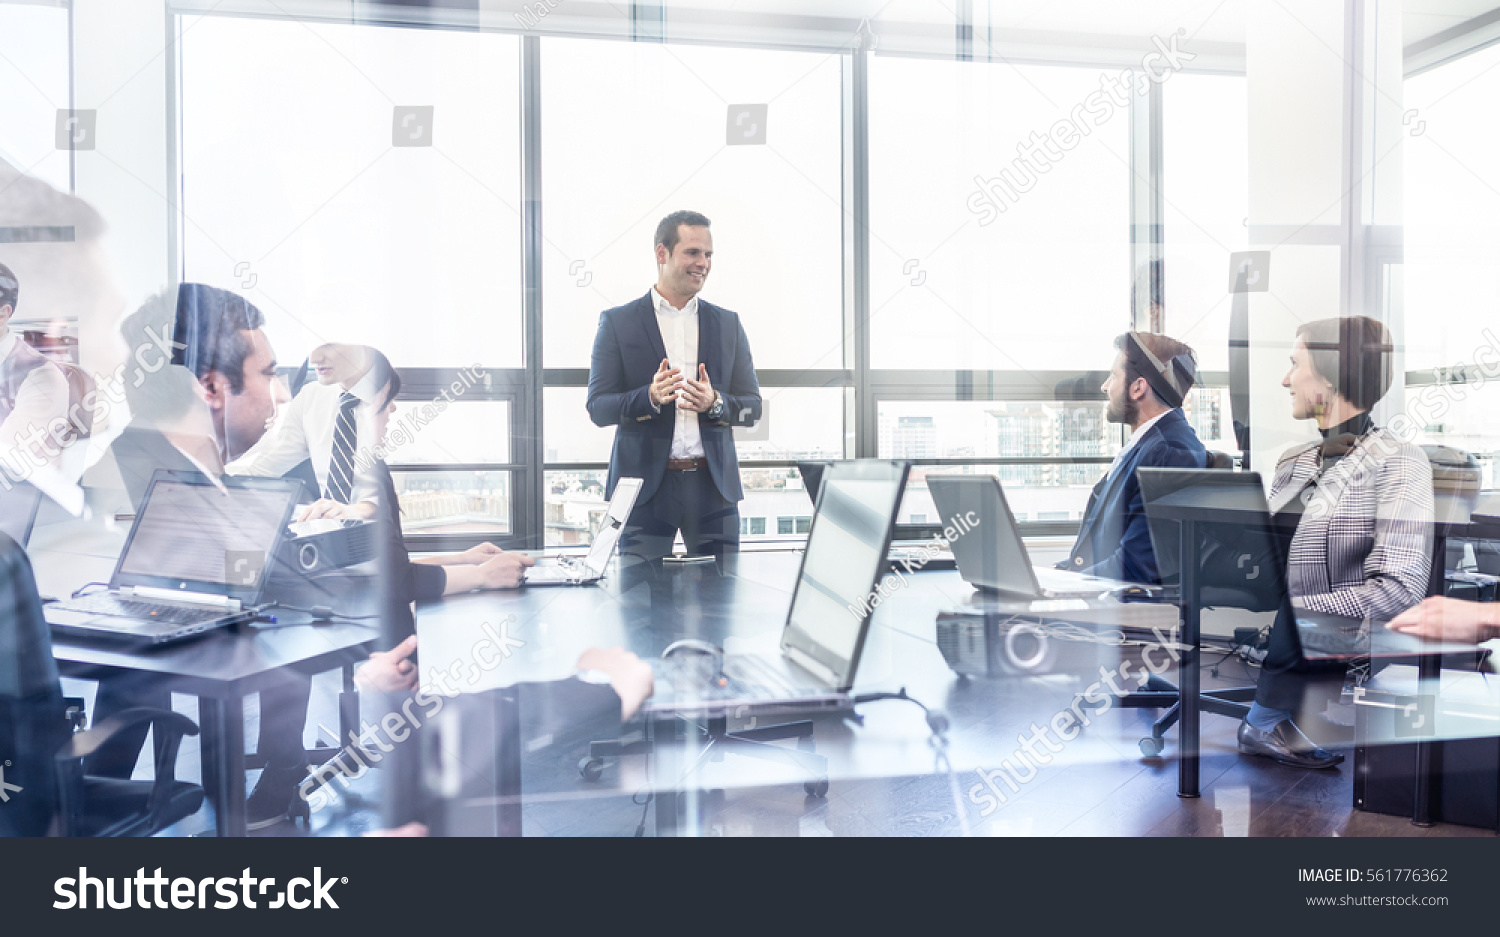 Successful team leader and business owner leading informal in-house business meeting. Businessman working on laptop in foreground. Business and entrepreneurship concept. #561776362